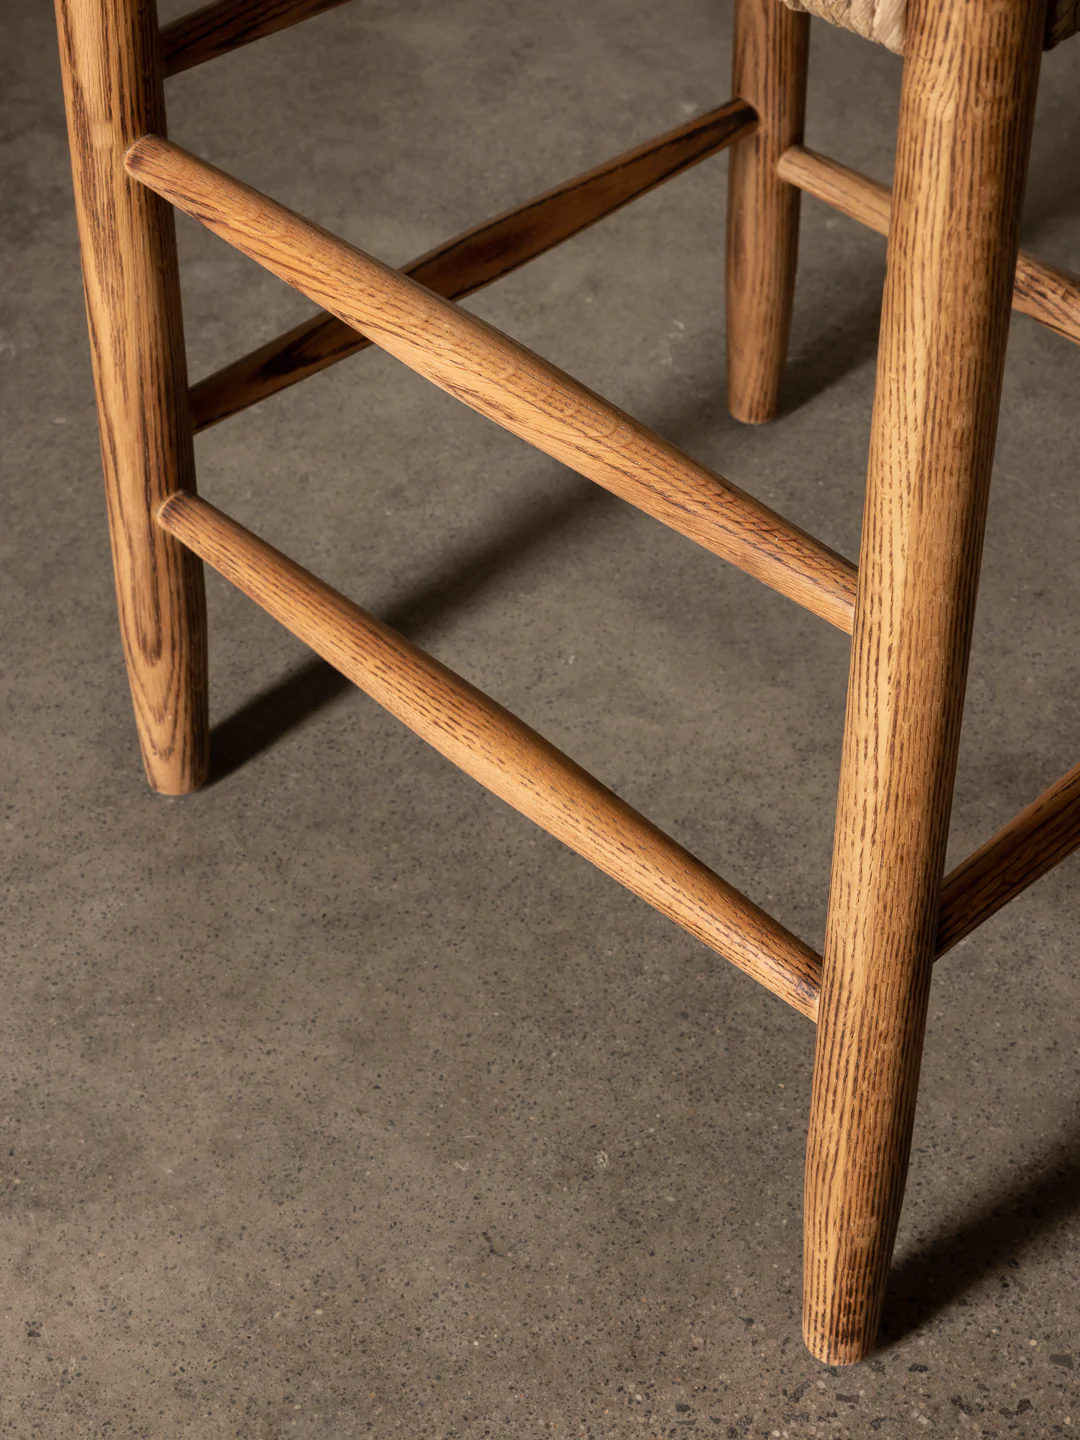 a close up of a wooden stool with a leather seat